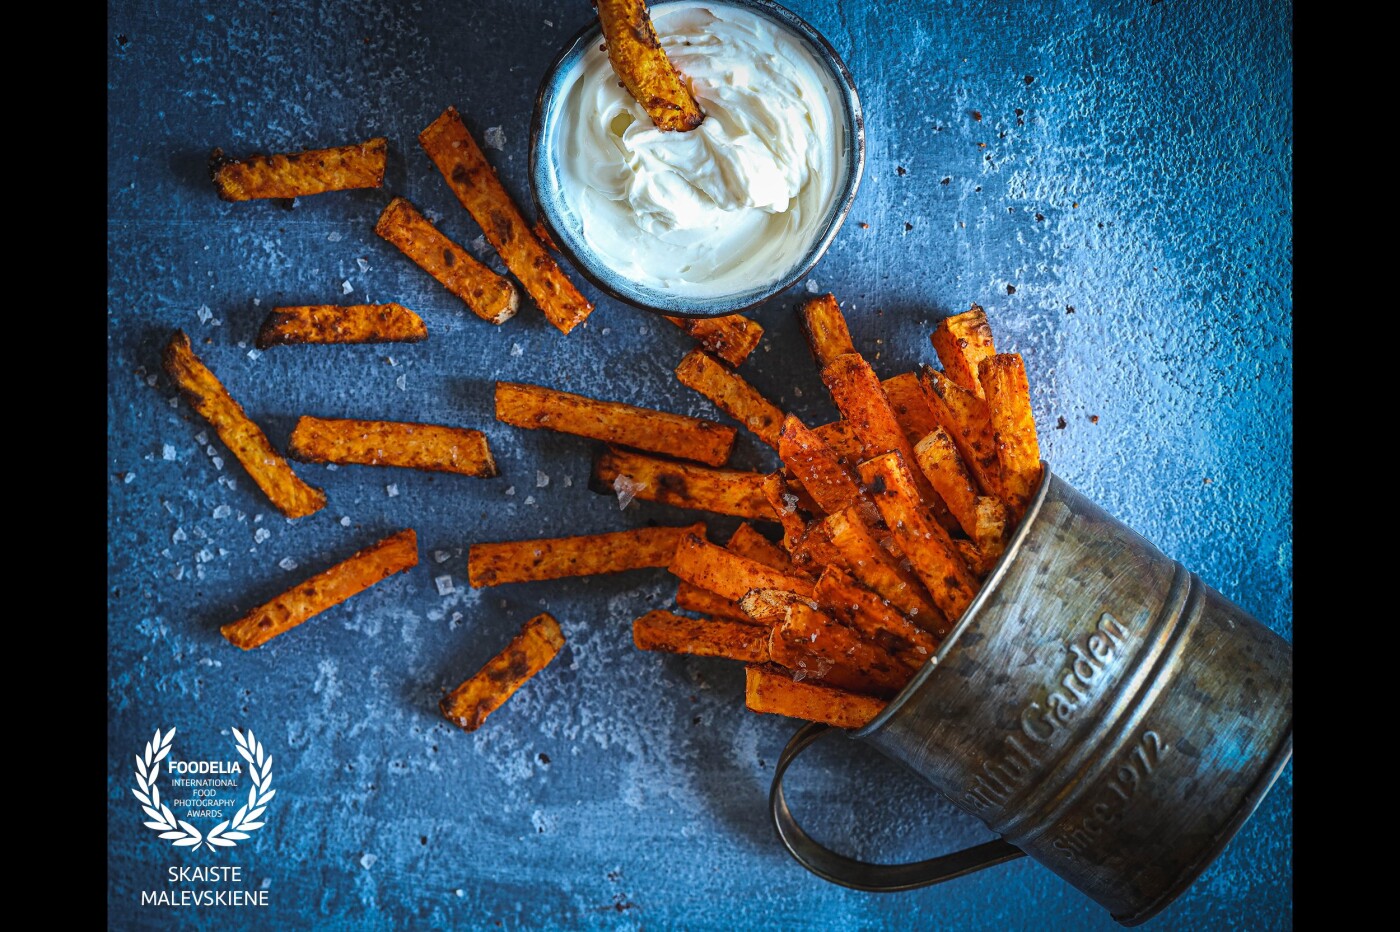 Healthy and delicious sweet potato chips with garlic and chili  powder. In this picture I wanted to emphasize the color and the texture of baked potato chips and contrasting blue background played the role perfectly.